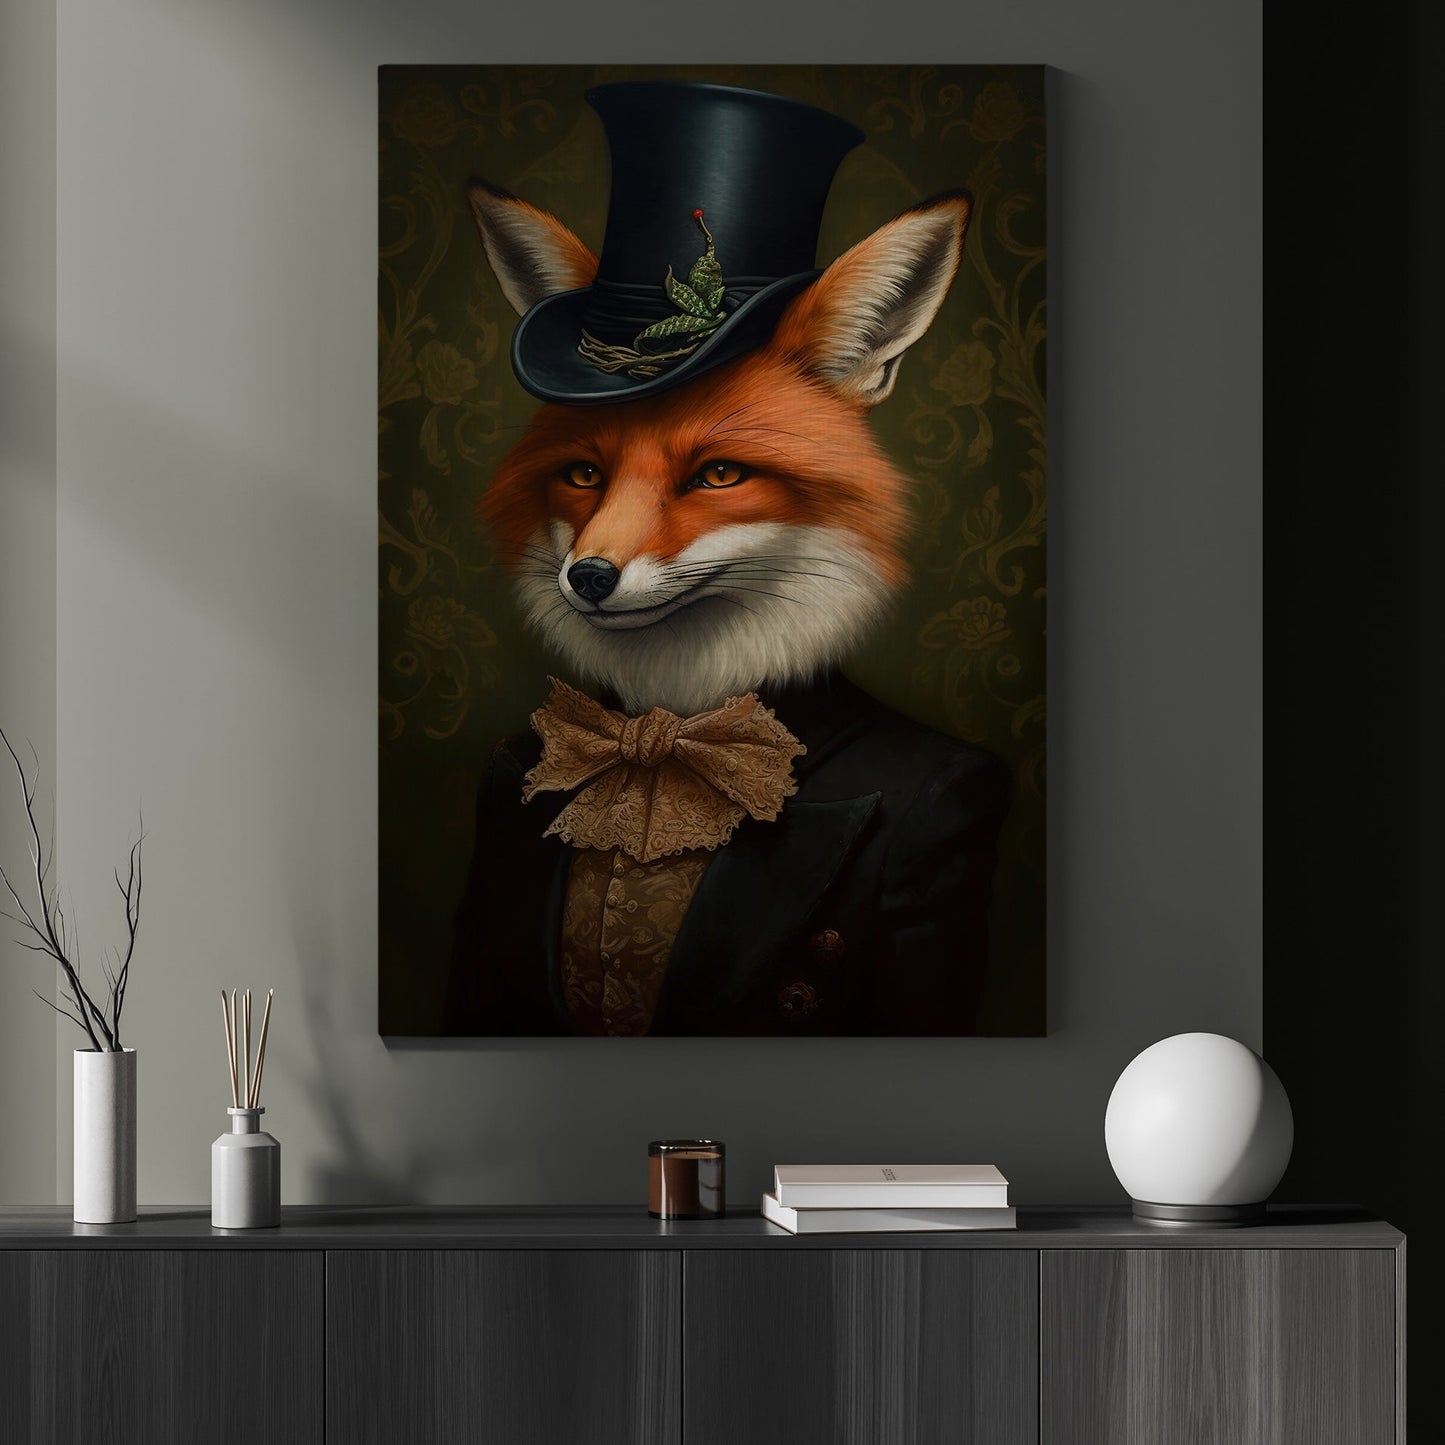 Distinguished Gentleman Fox, Victorian Fox Christmas Canvas Painting, Xmas Wall Art Decor - Christmas Poster Gift For Fox Lovers